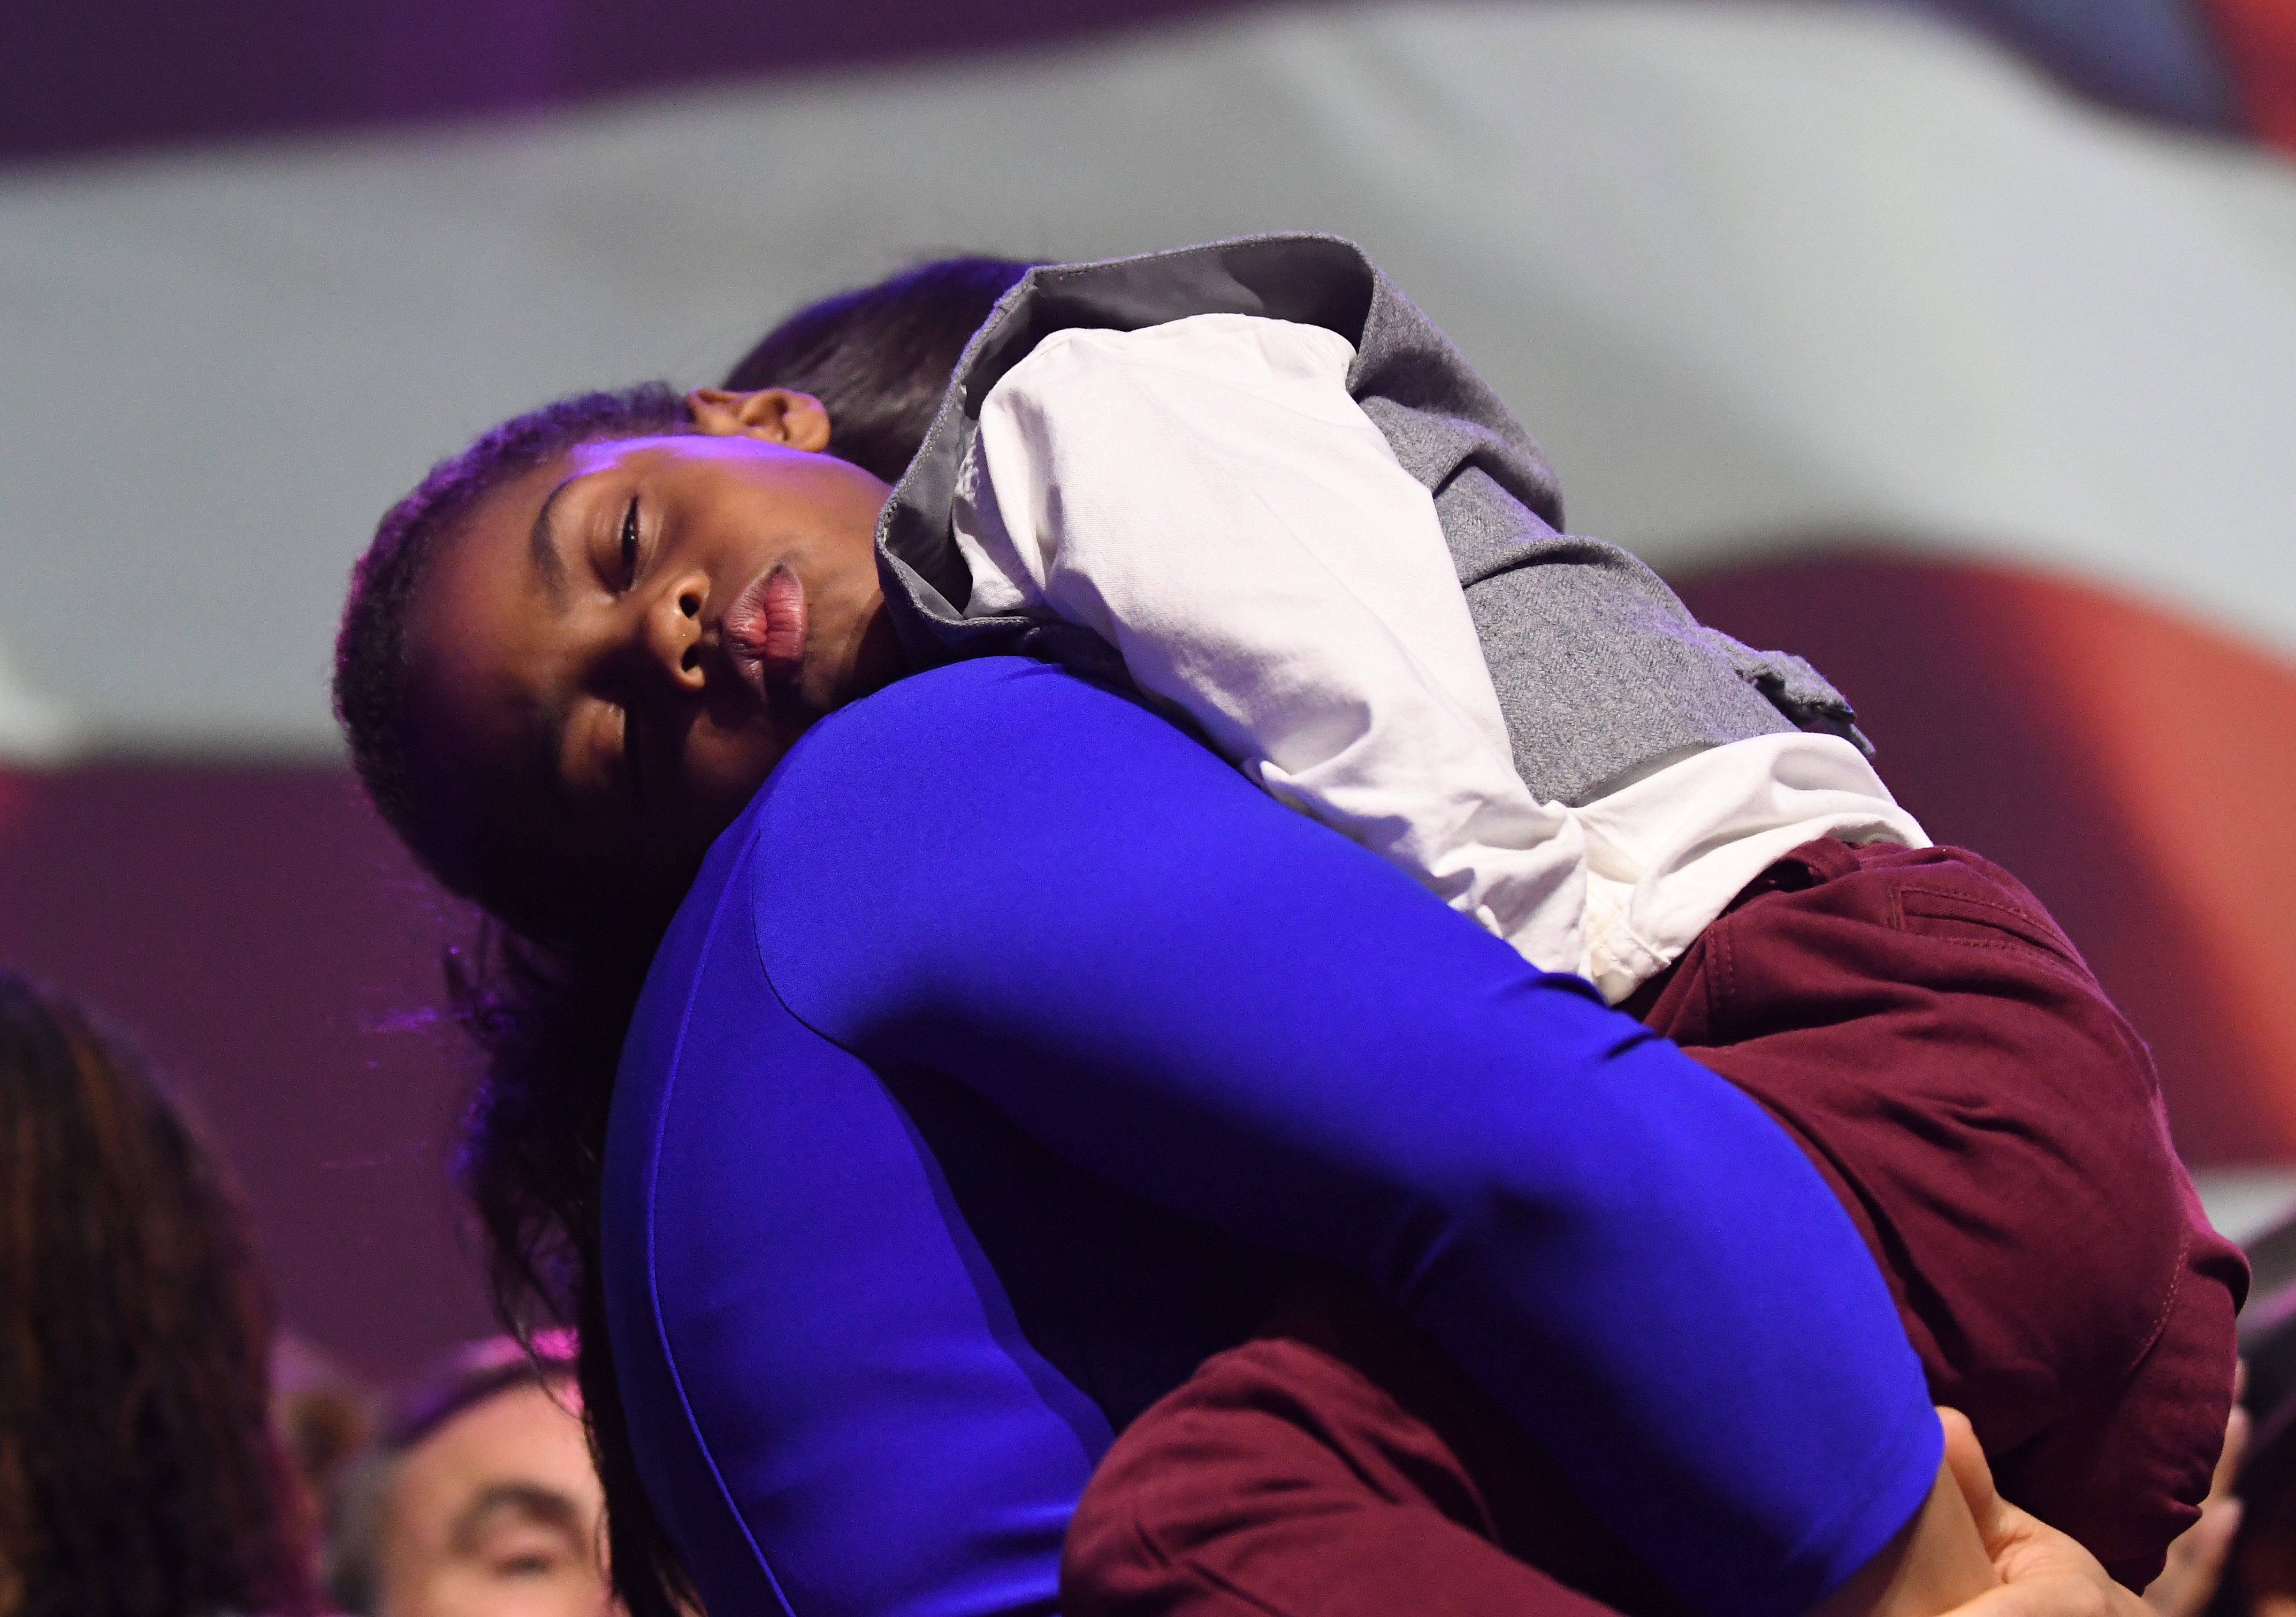 Lt. Governor-elect Garlin Gilchrist II's son falls asleep on his wife's shoulder at the  Democratic Party's election night event.